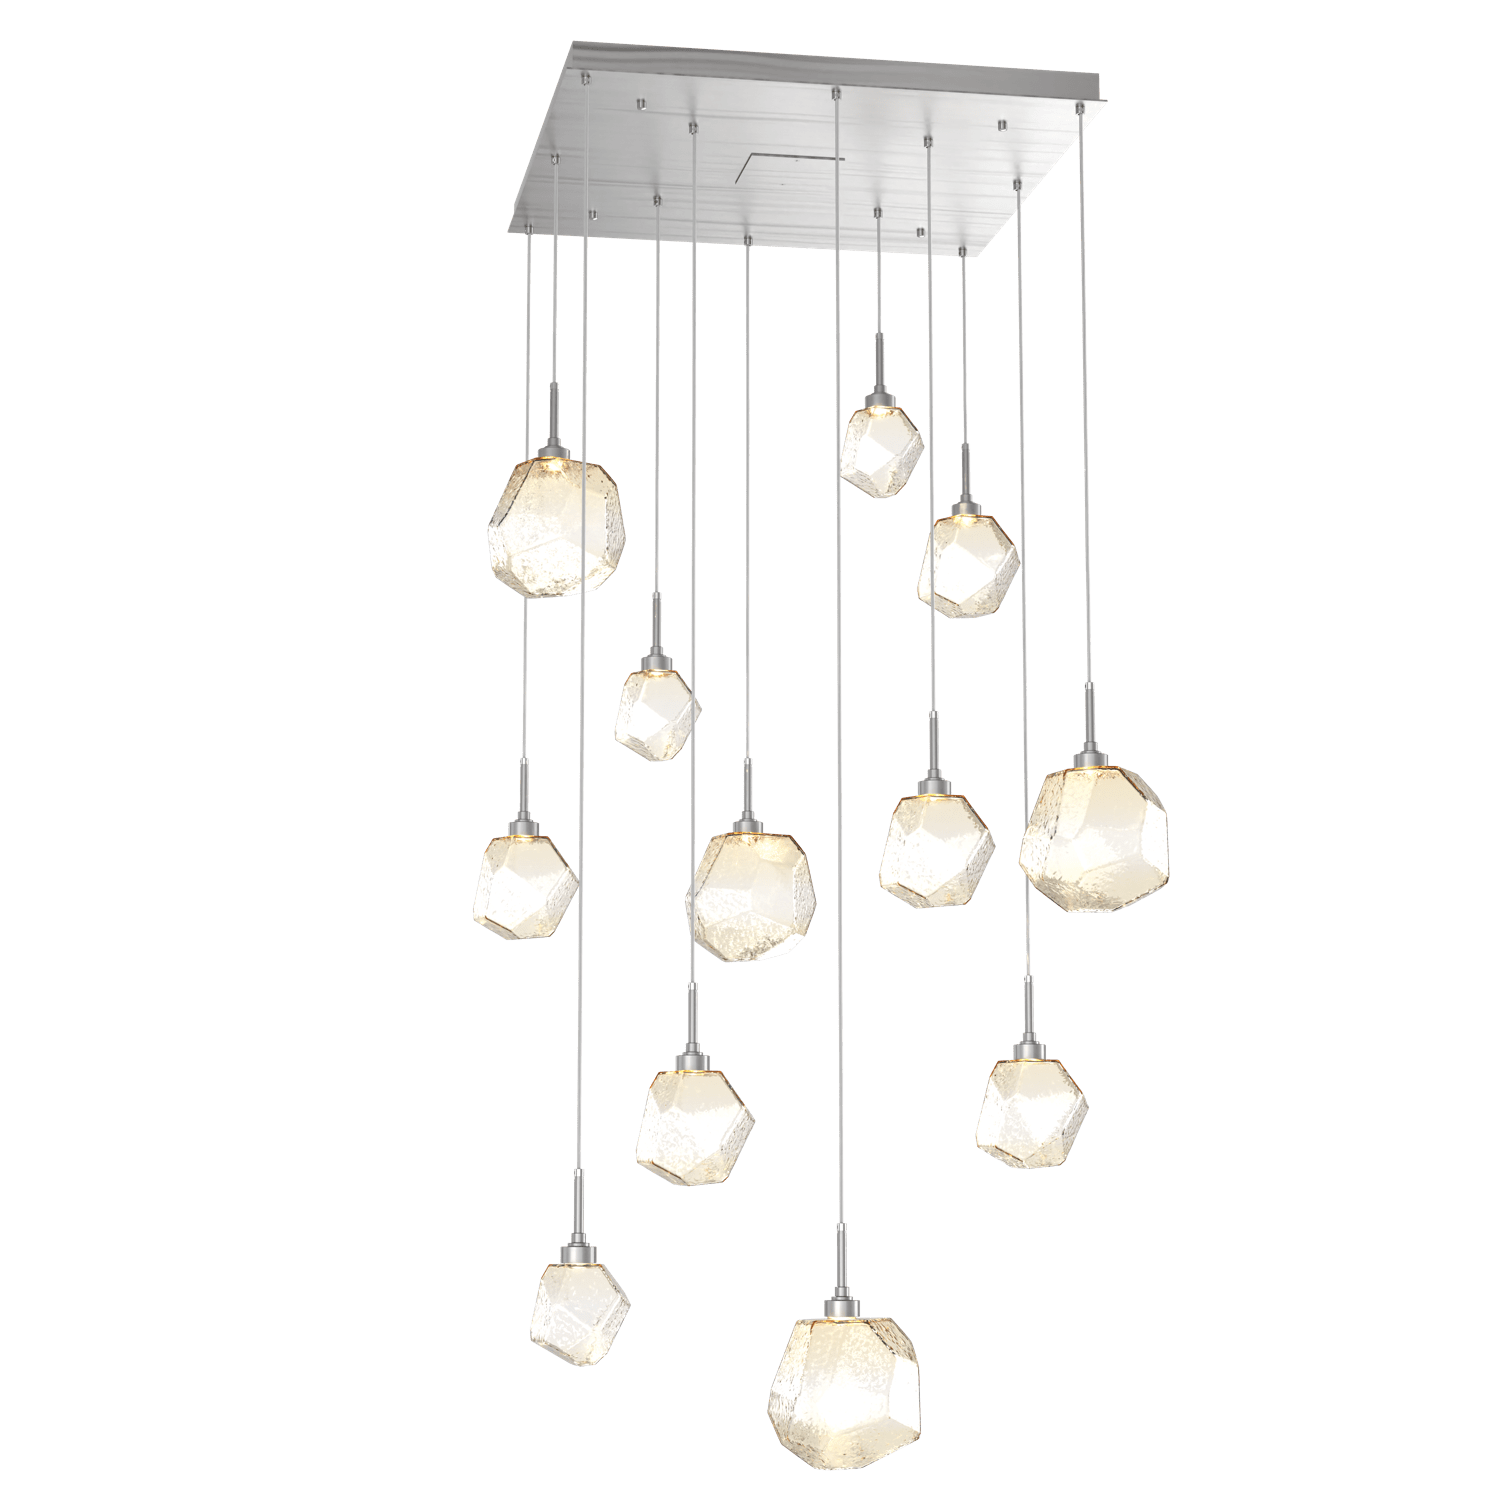 CHB0039-12-SN-A-Hammerton-Studio-Gem-12-light-square-pendant-chandelier-with-satin-nickel-finish-and-amber-blown-glass-shades-and-LED-lamping